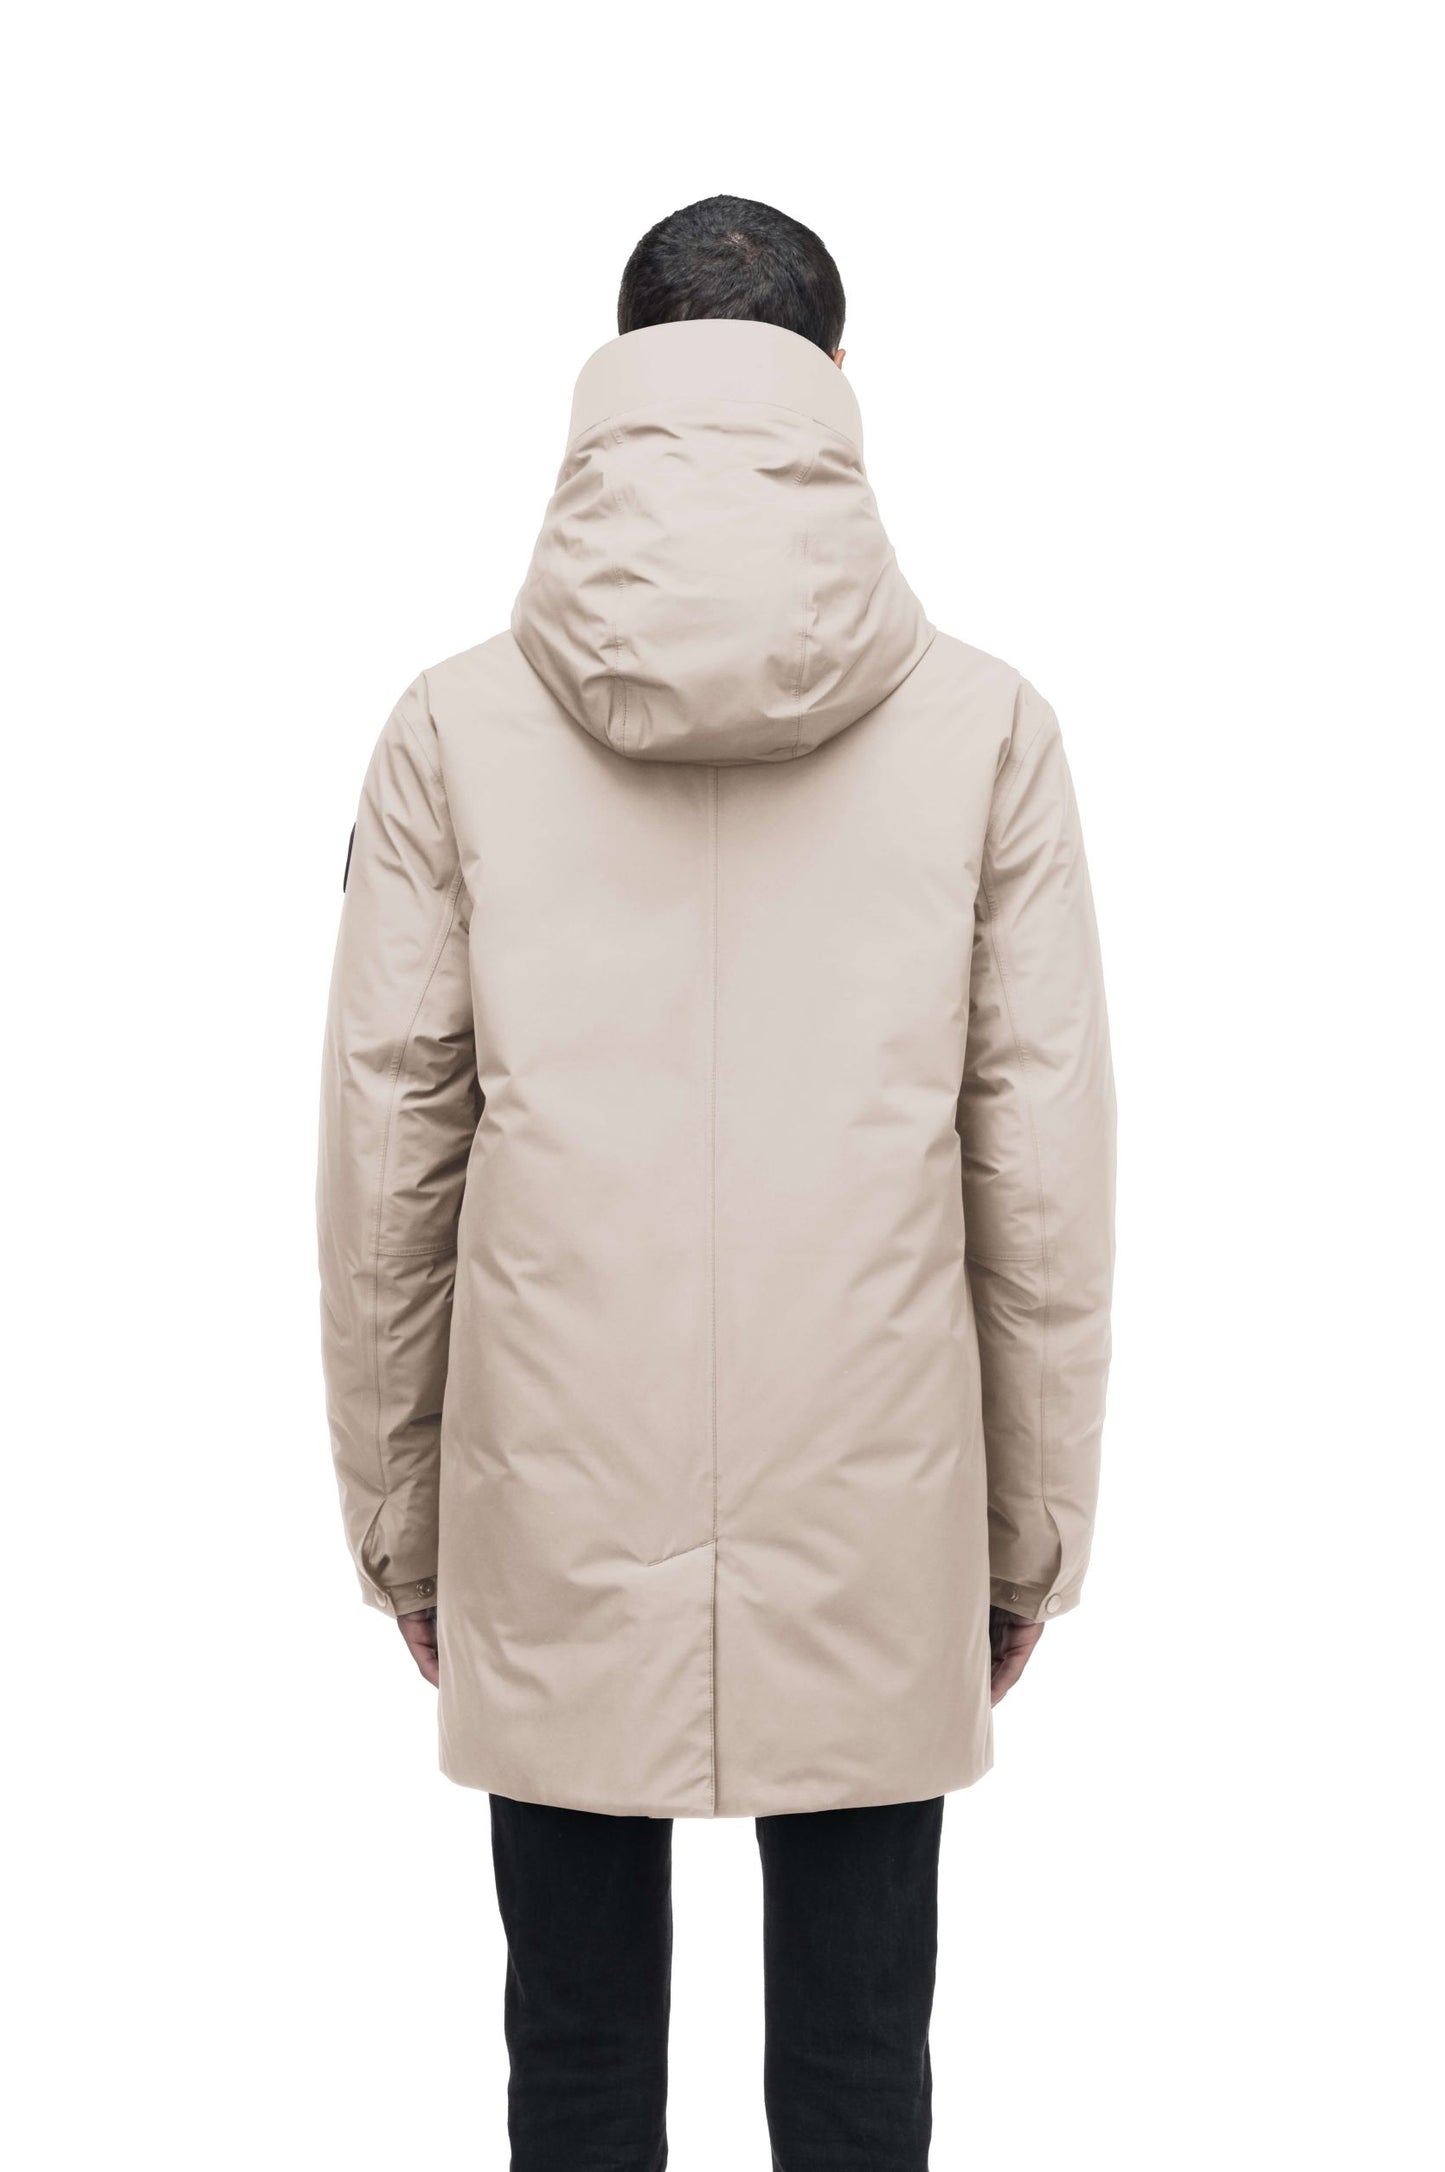 Atlas Men's Performance Parka in thigh length, Canadian duck down insulation, removable hood, and two-way zipper, in Clay